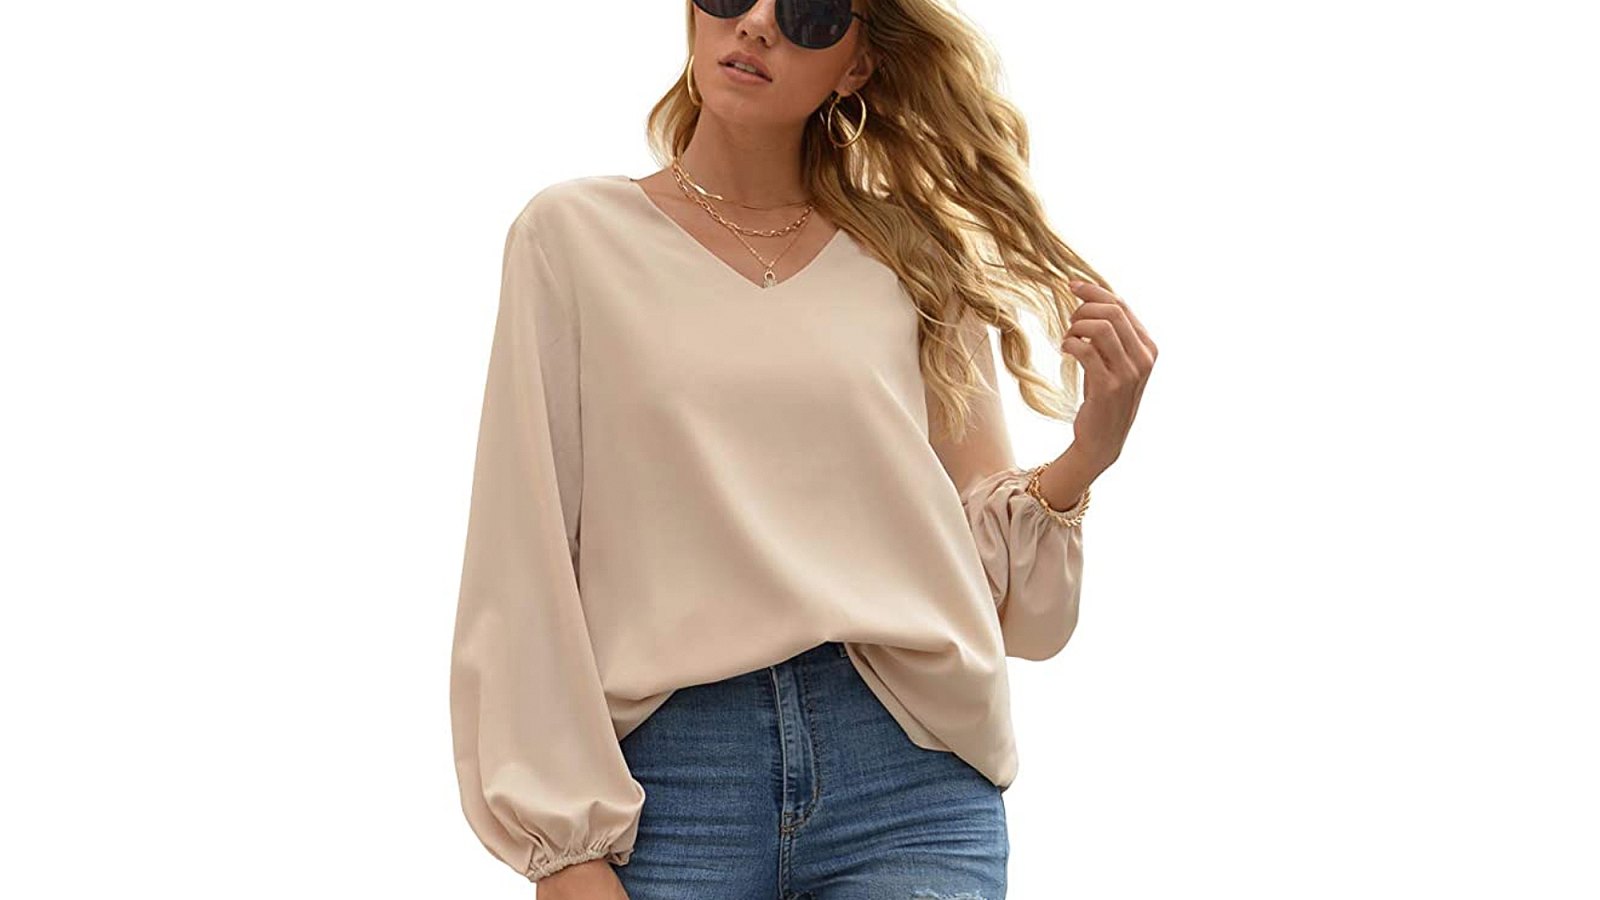 Women's Casual Tops, Casual Tops to Wear With Jeans